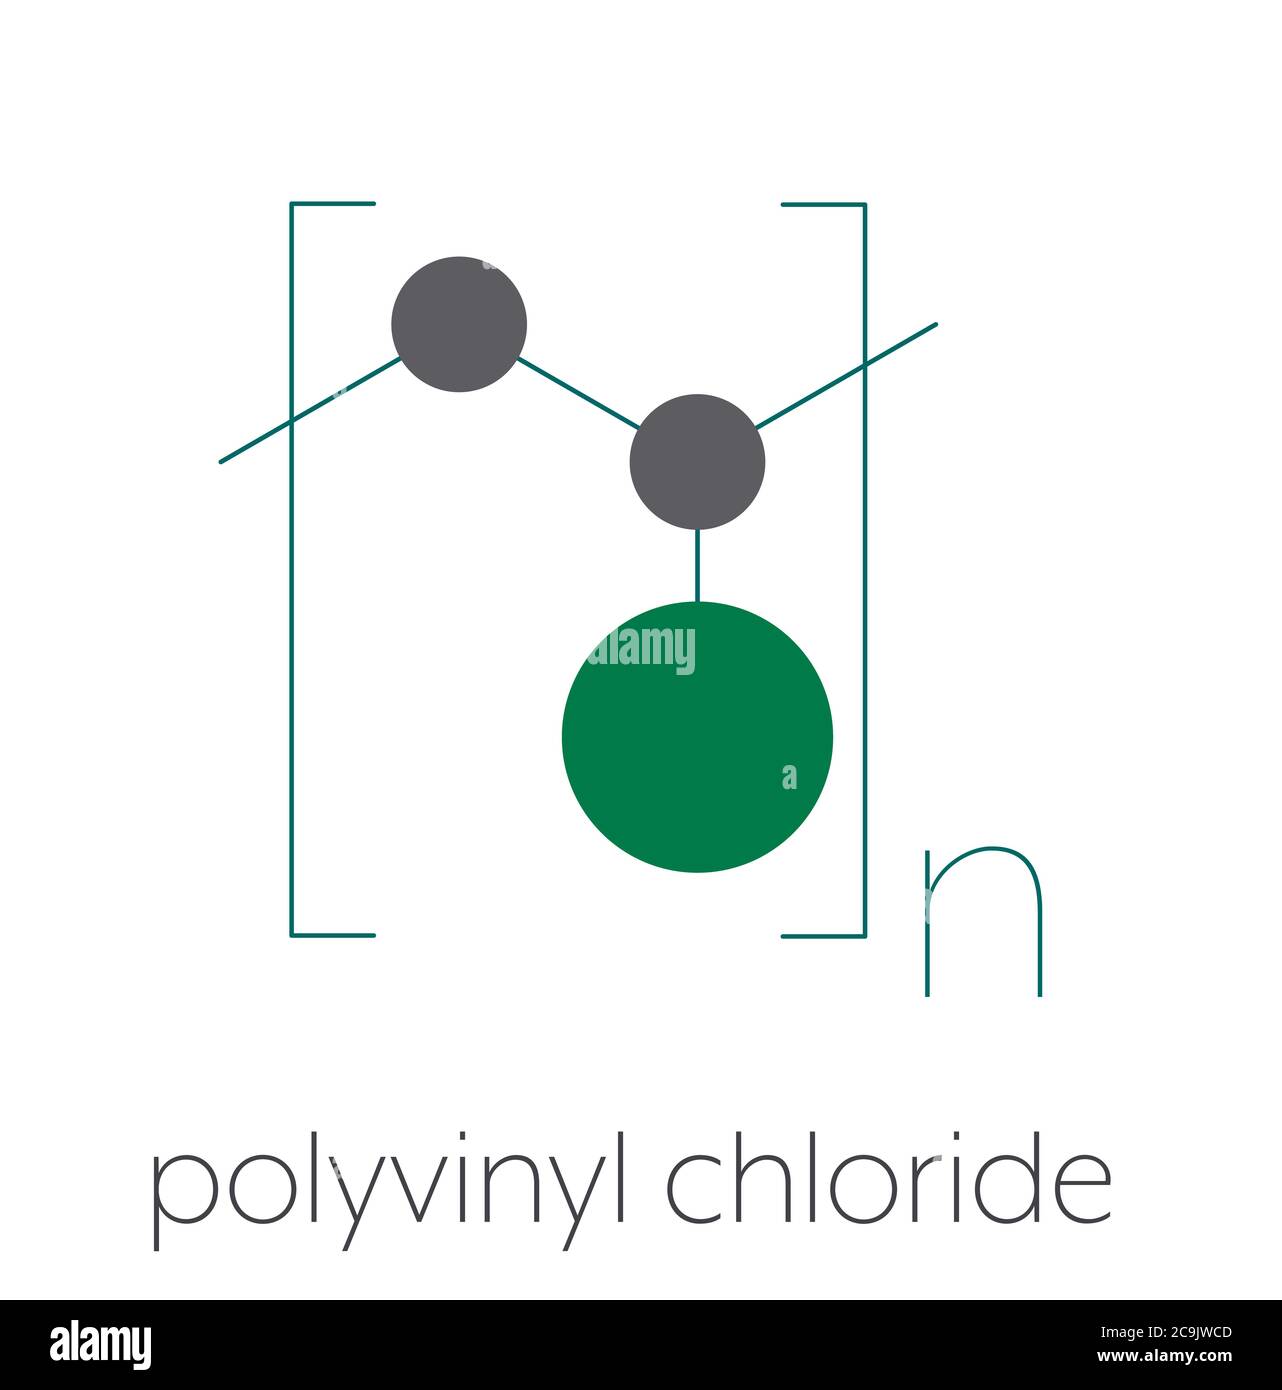 poly(vinyl chloride) plastic chemical structure. Stylized skeletal formula: Atoms are shown as color-coded circles connected by thin bonds, on Stock -